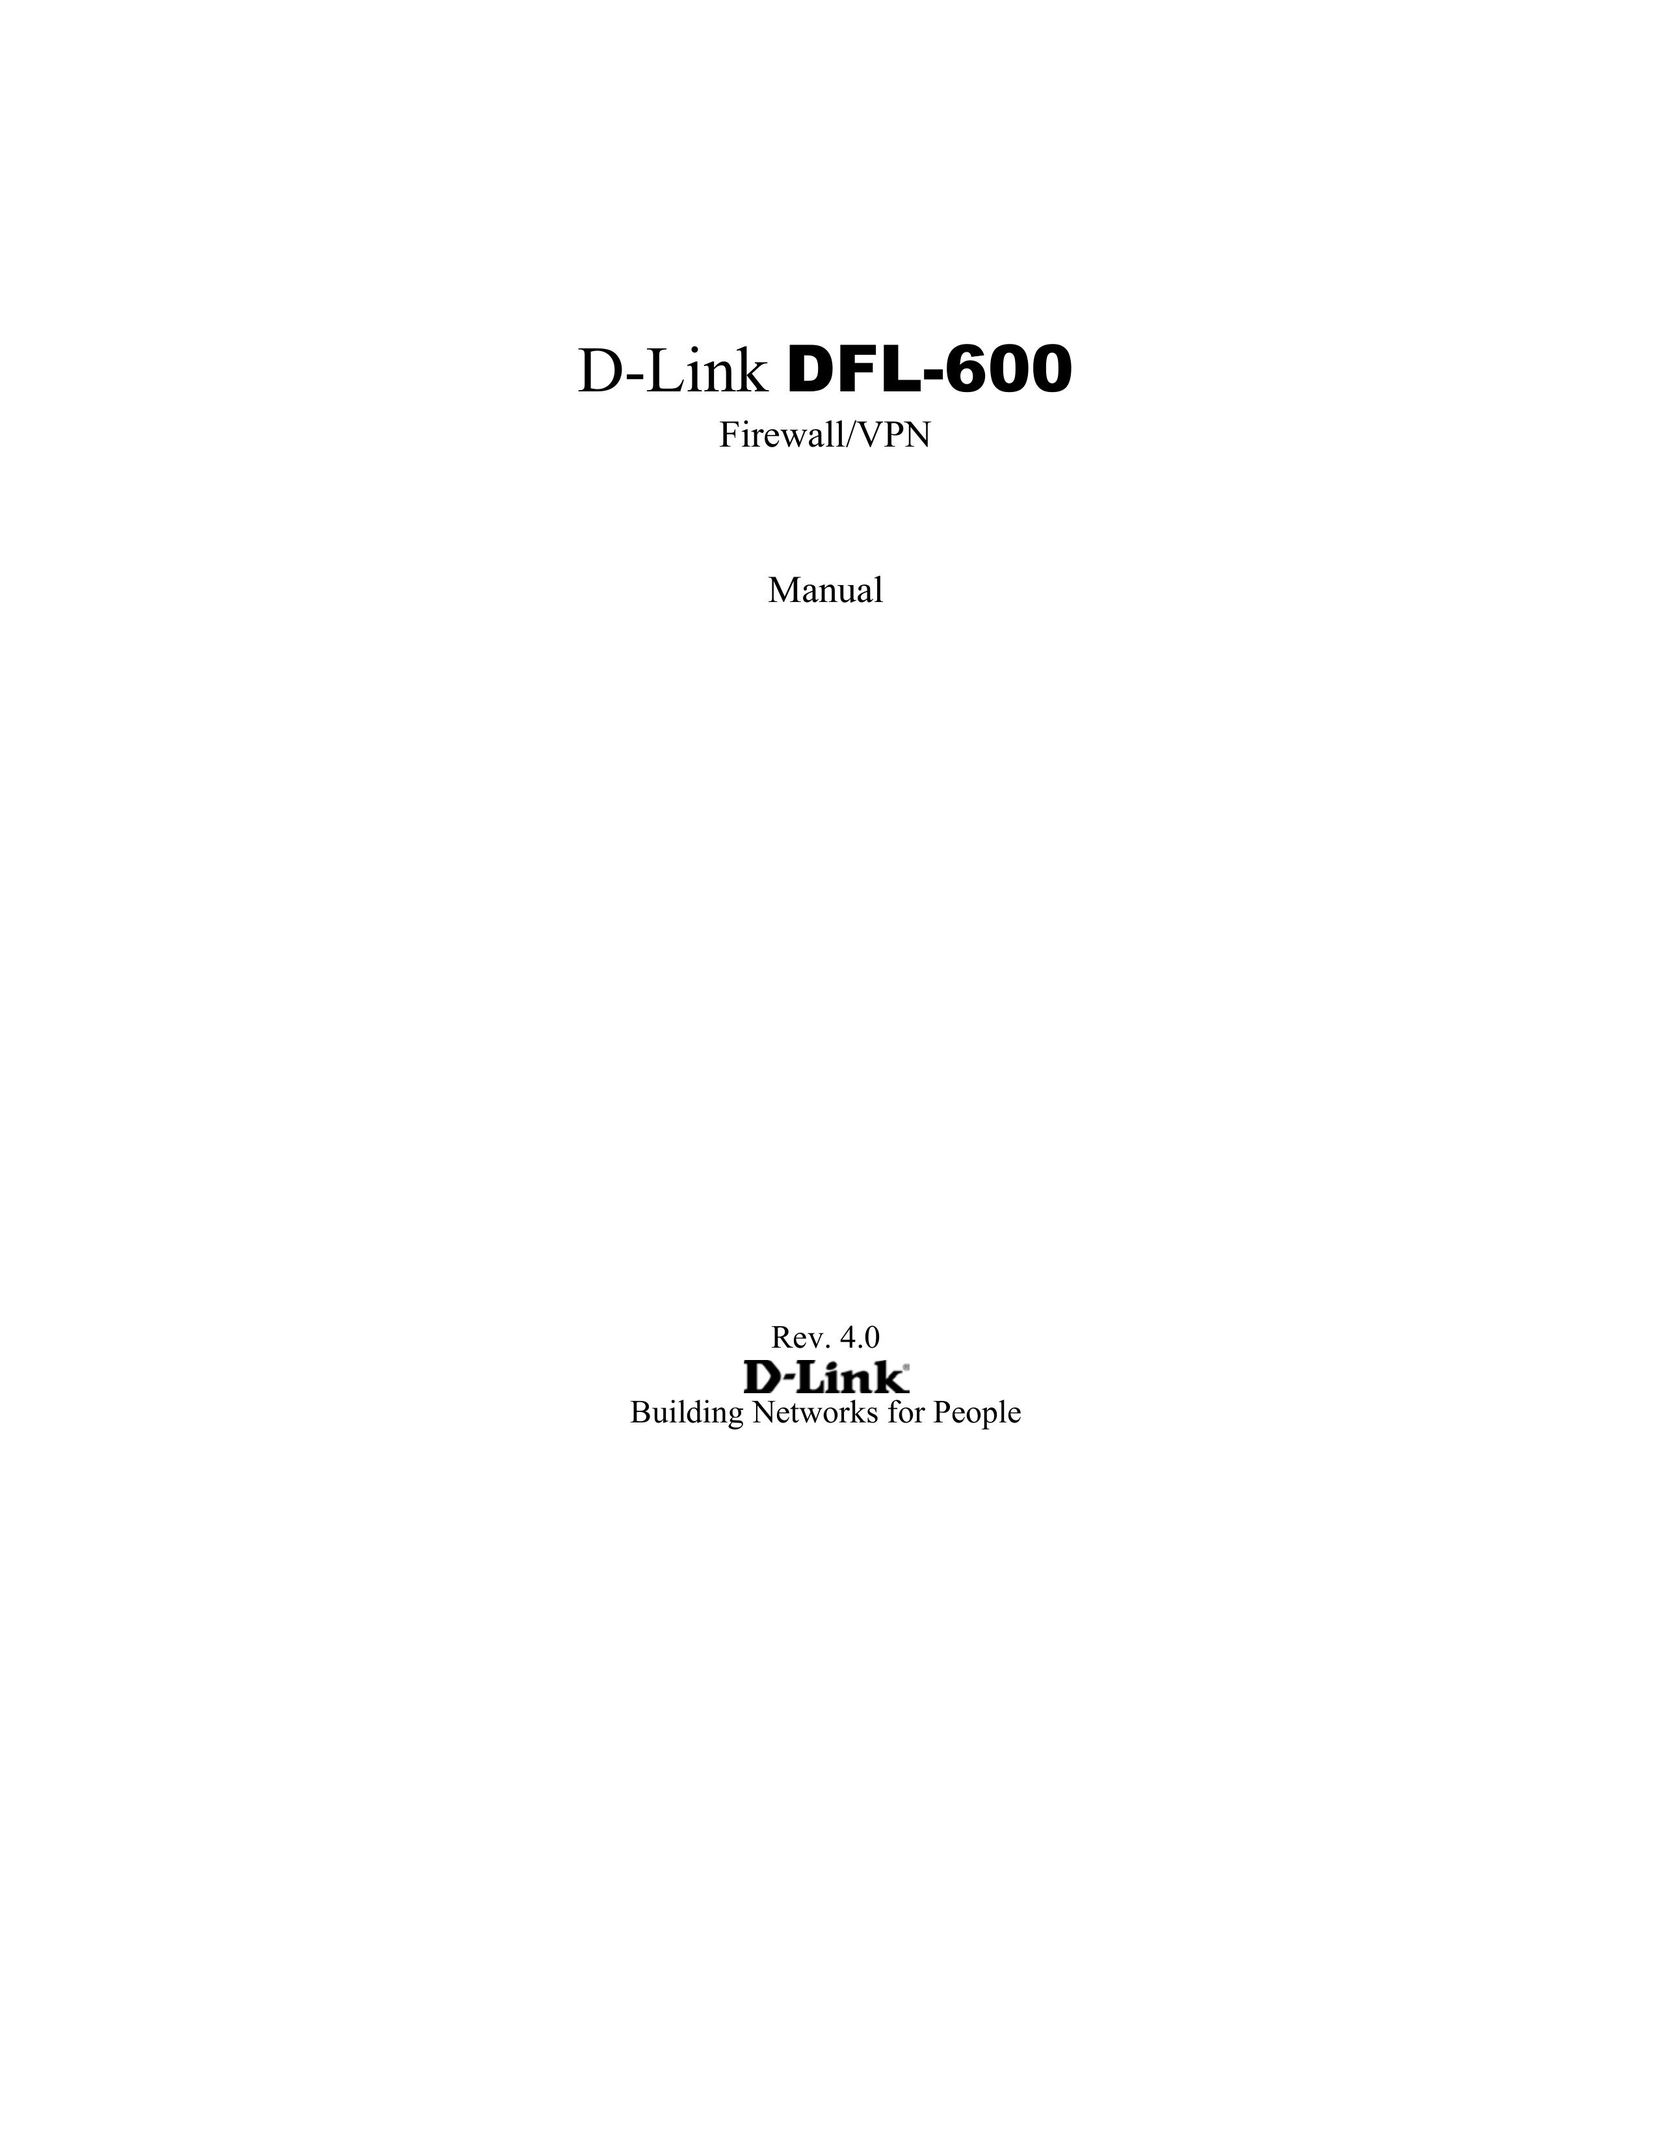 D-Link DFL-600 Network Router User Manual